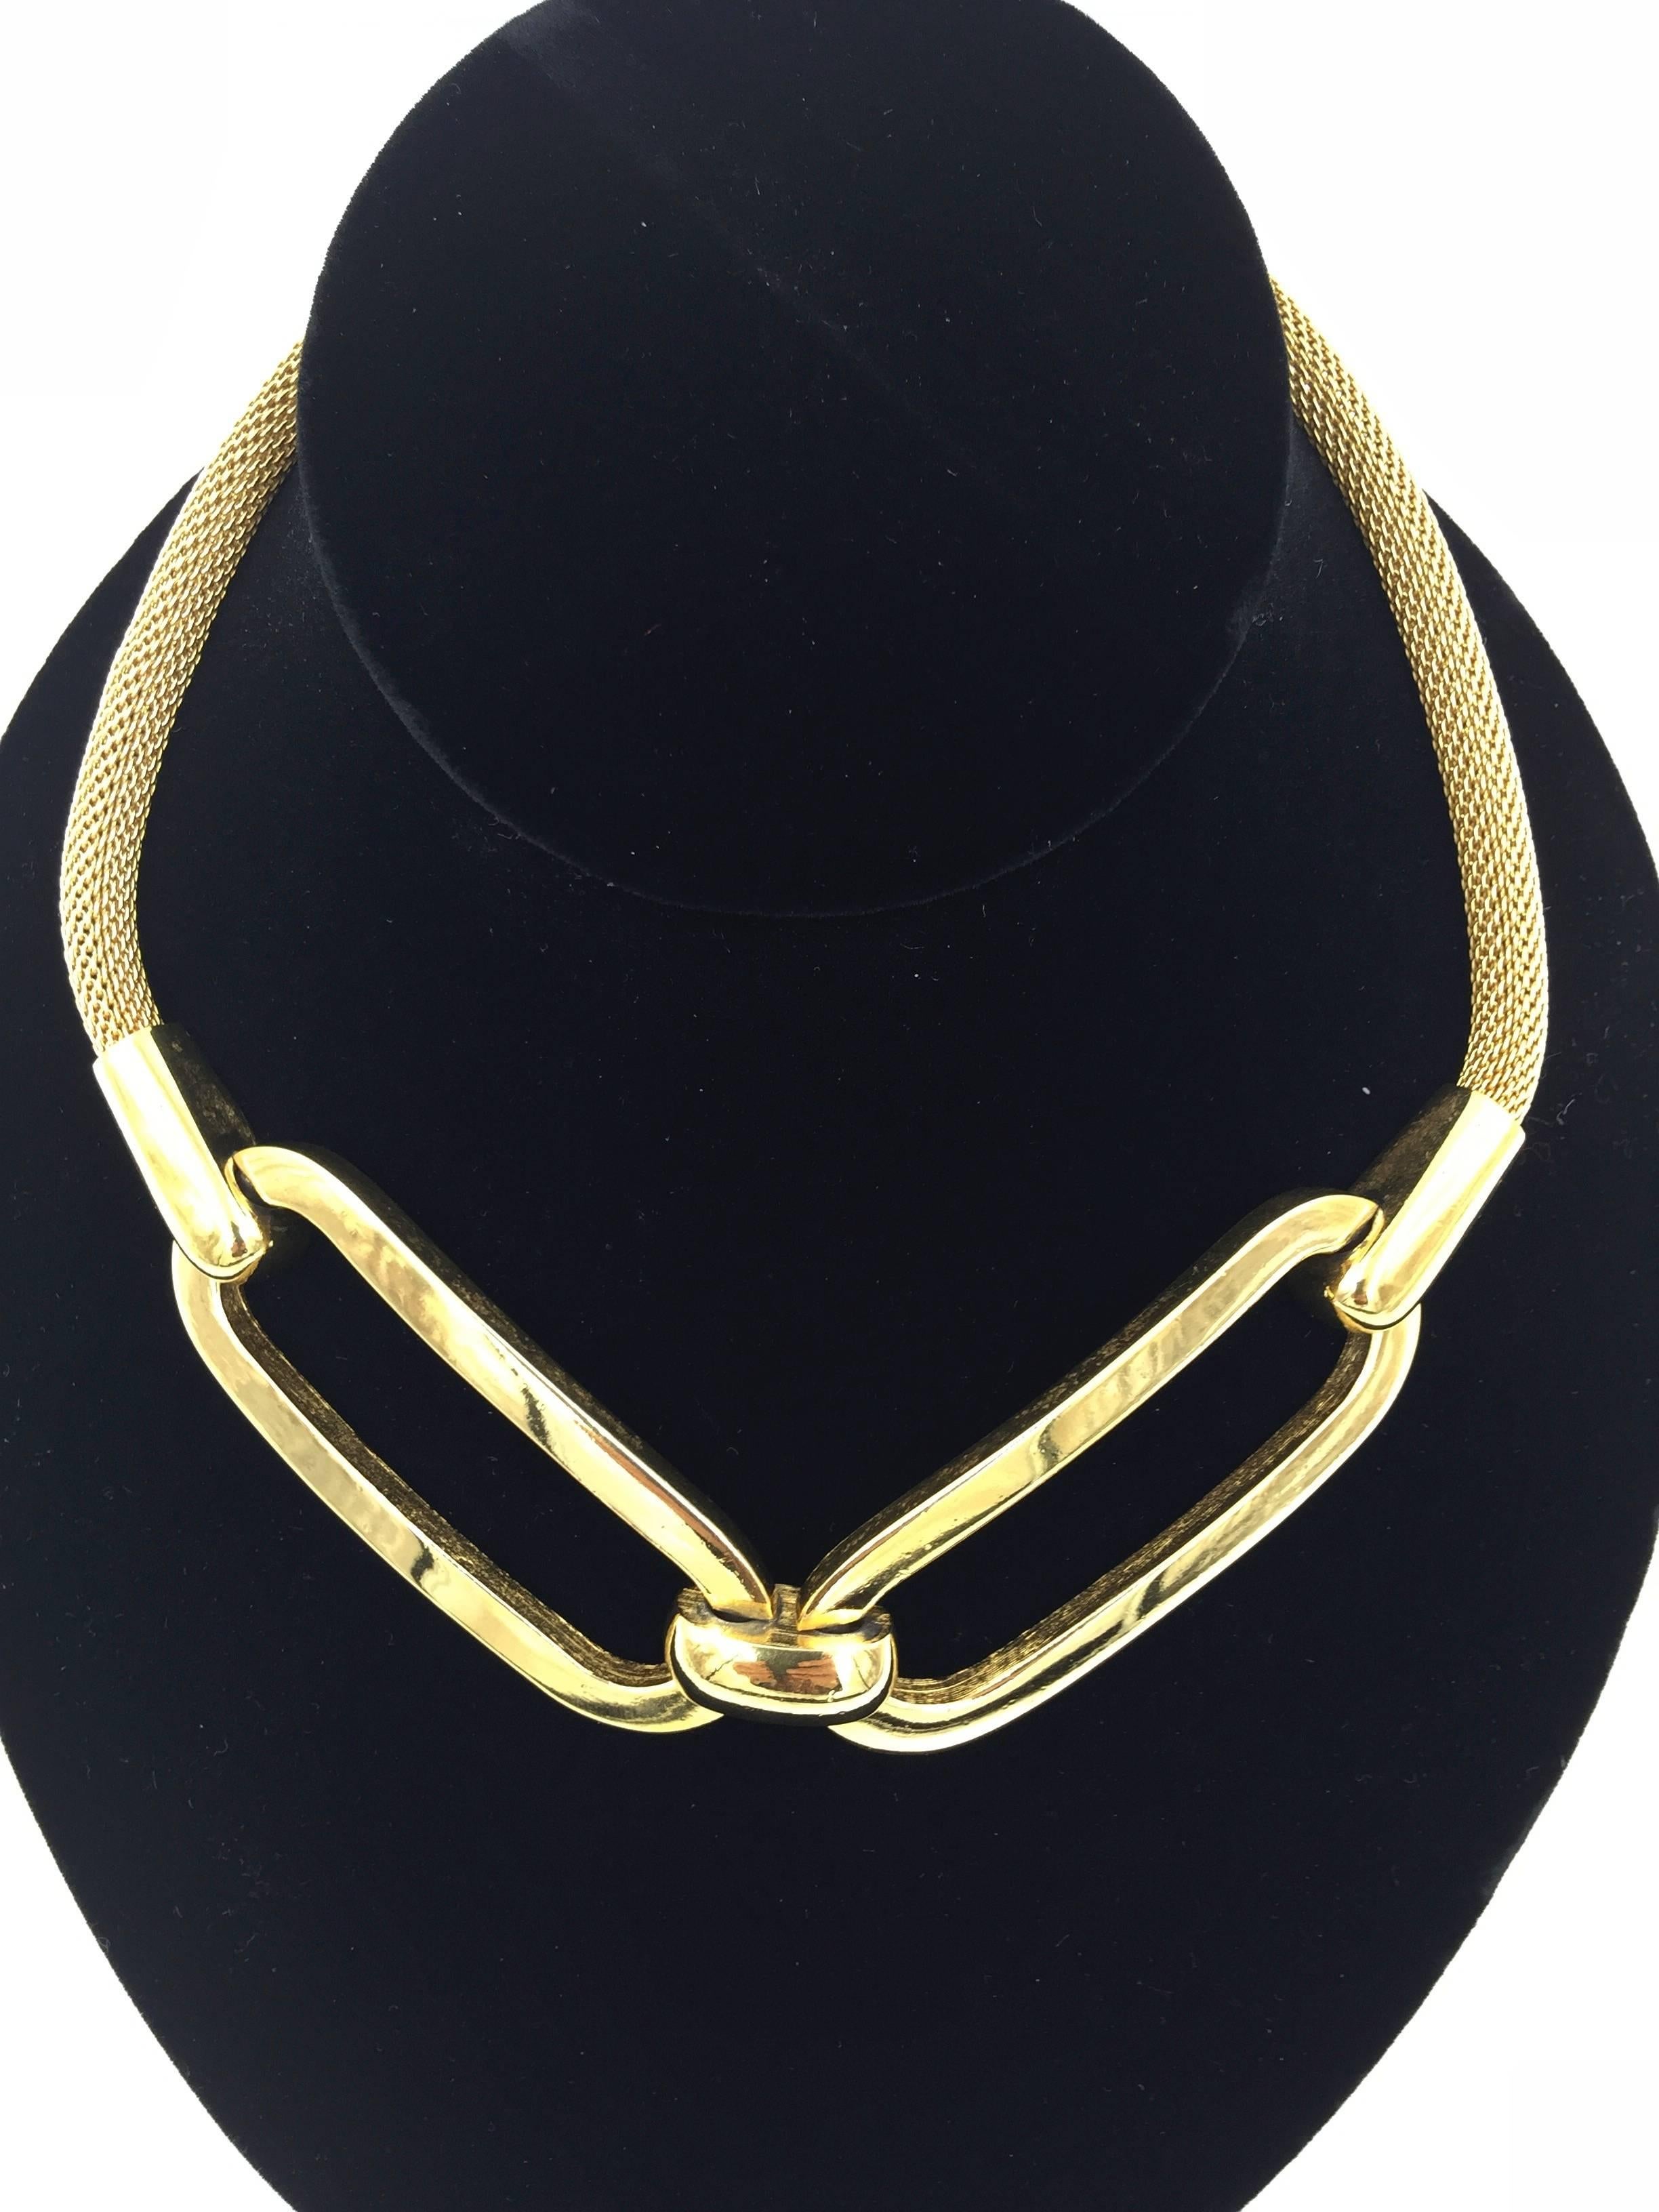 
This piece is wonderfully bold and graphic.

Givenchy gold toned necklace comprised of two joined
ovals suspended from a snake chain.

Epitomizes that sleek 1970's New York style,
think Halston and Studio 54!

Fabulous quality. Really